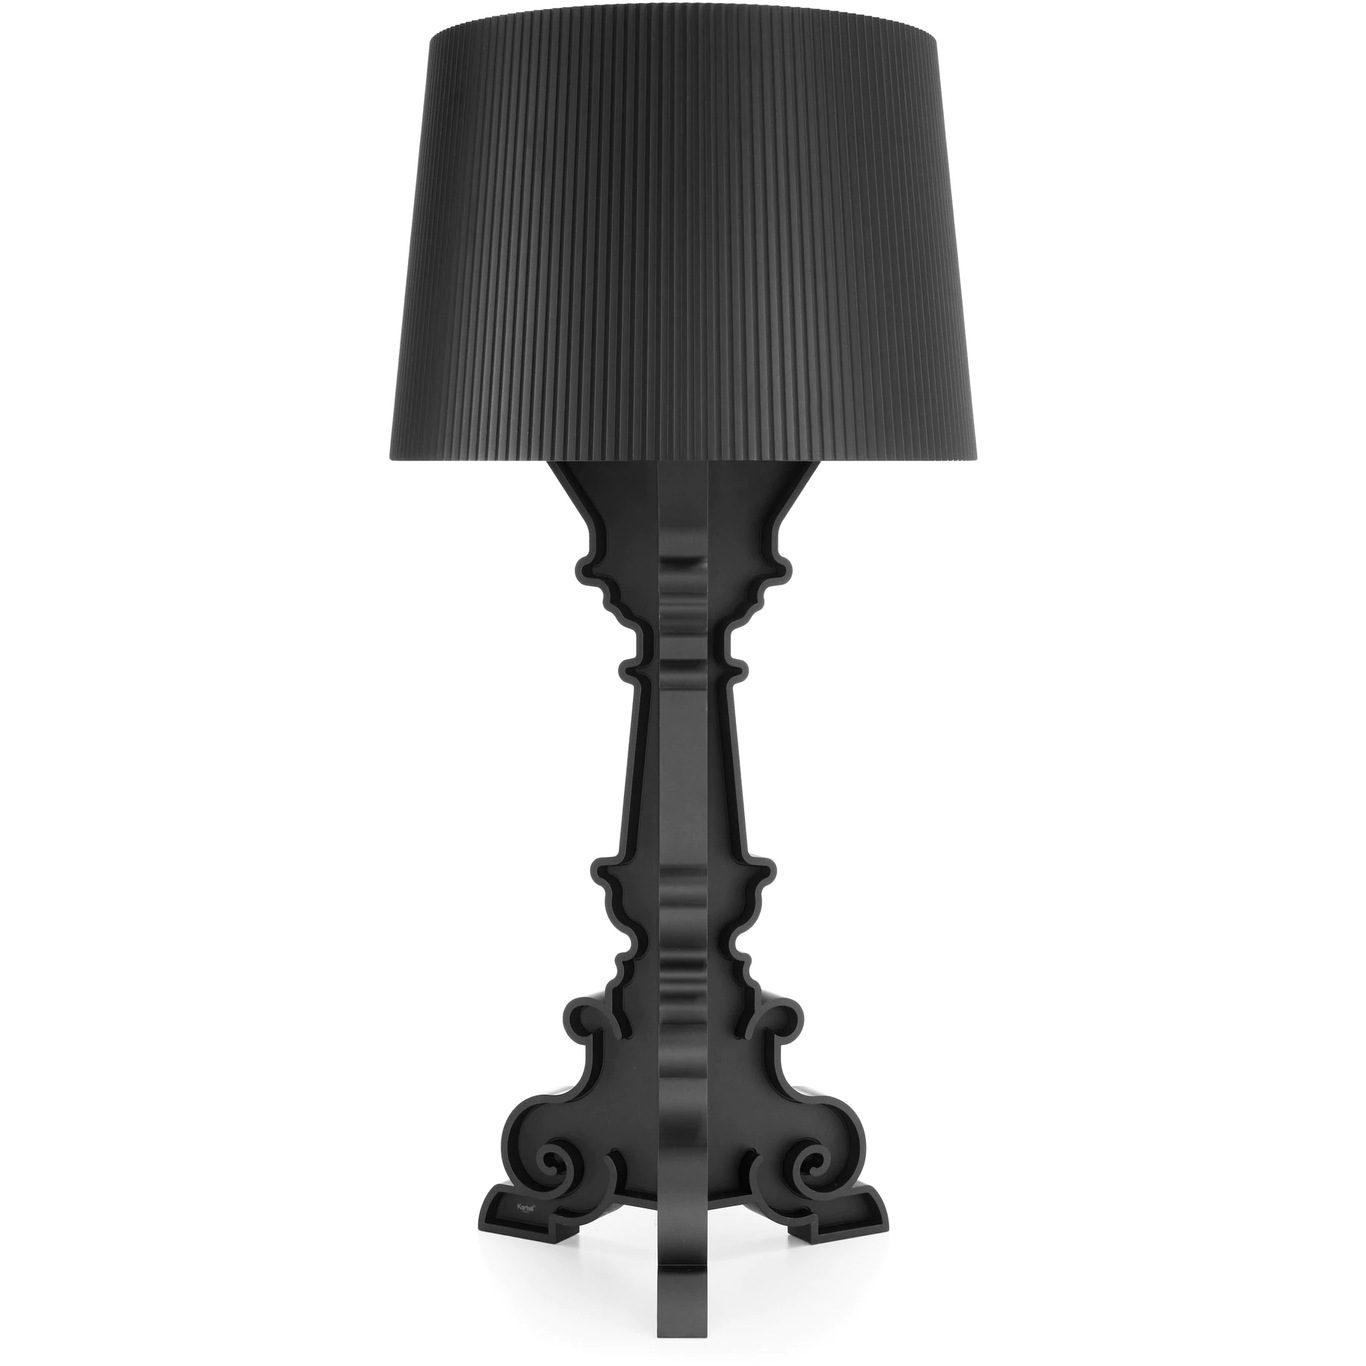 Bourgie Table Lamp, Matte black